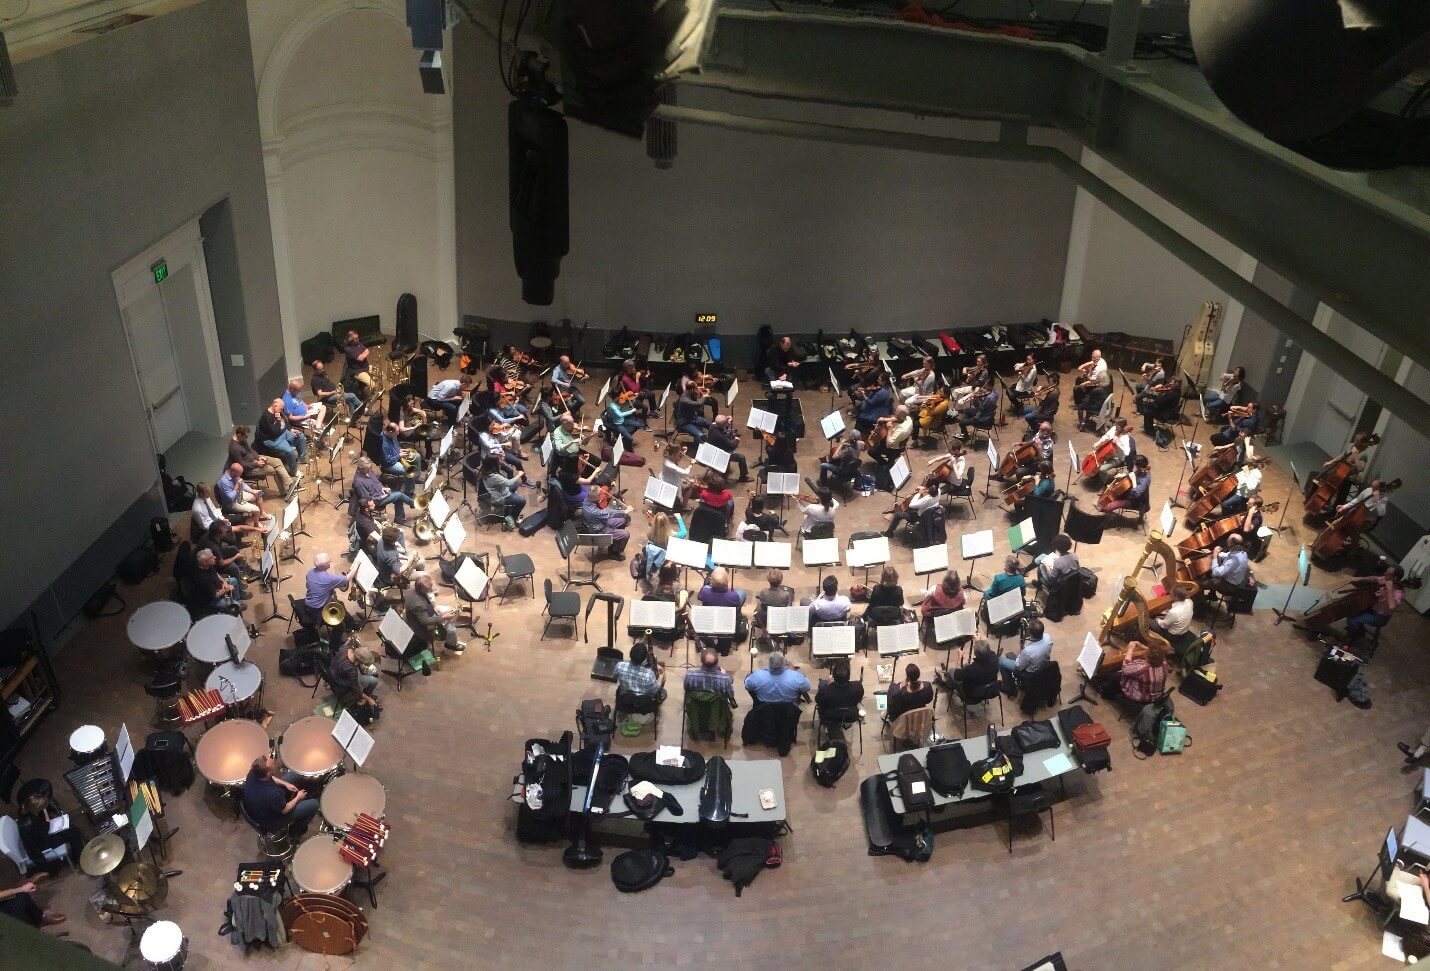 The might of the San Francisco Opera Orchestra in a Sitzprobe rehearsal in the Taube Atrium of the Wilsey Center.